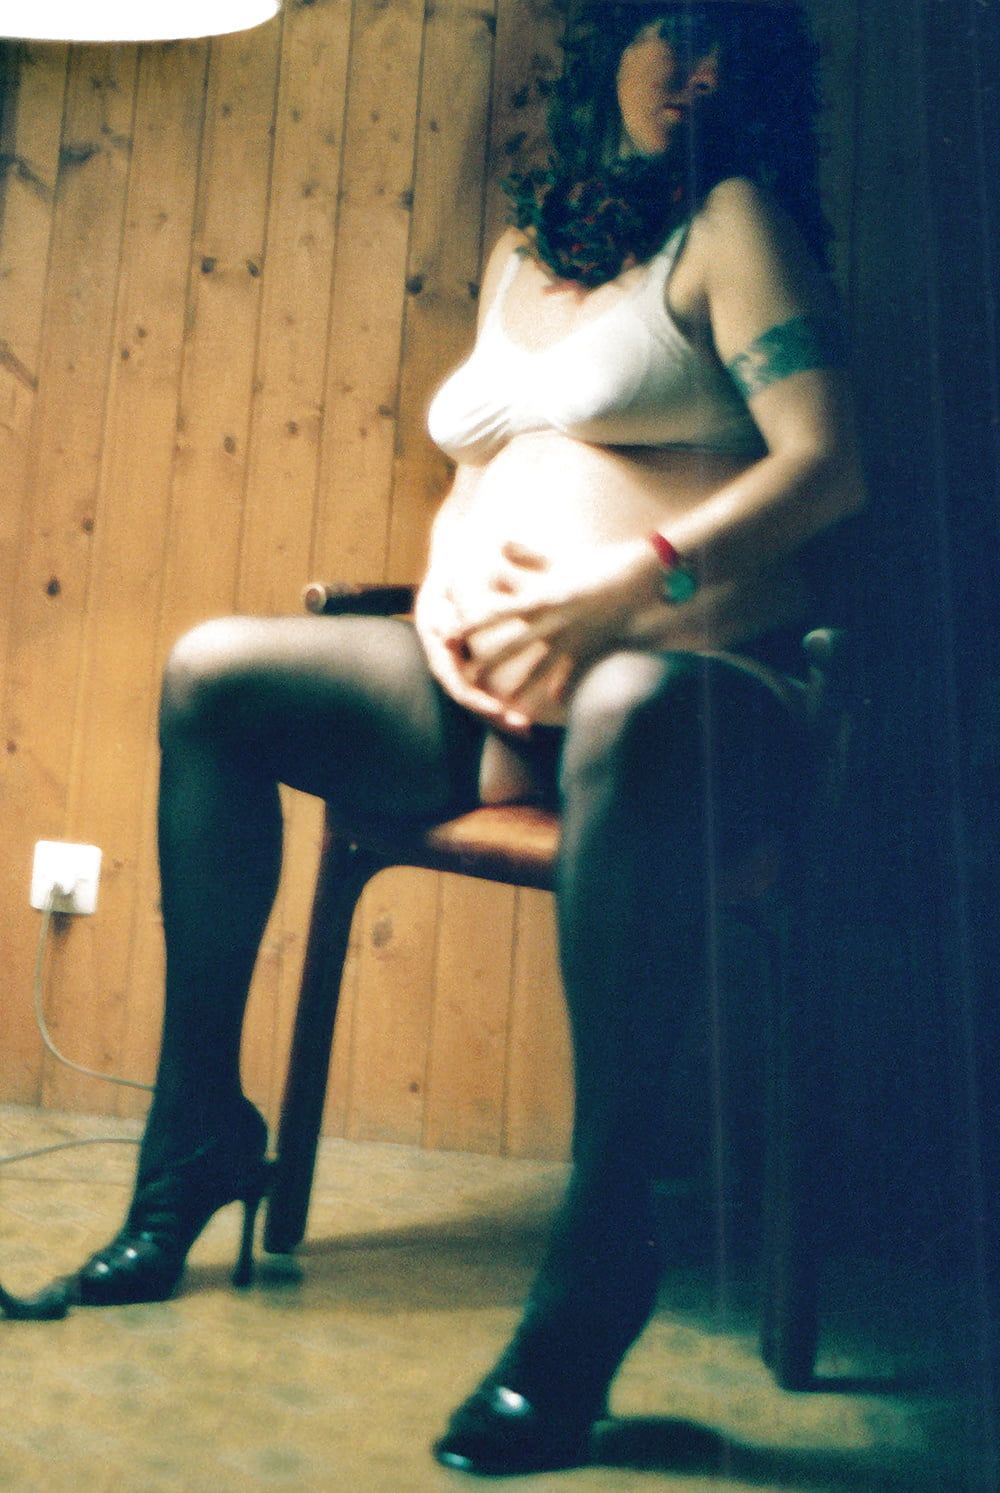 My pregnant wife #2